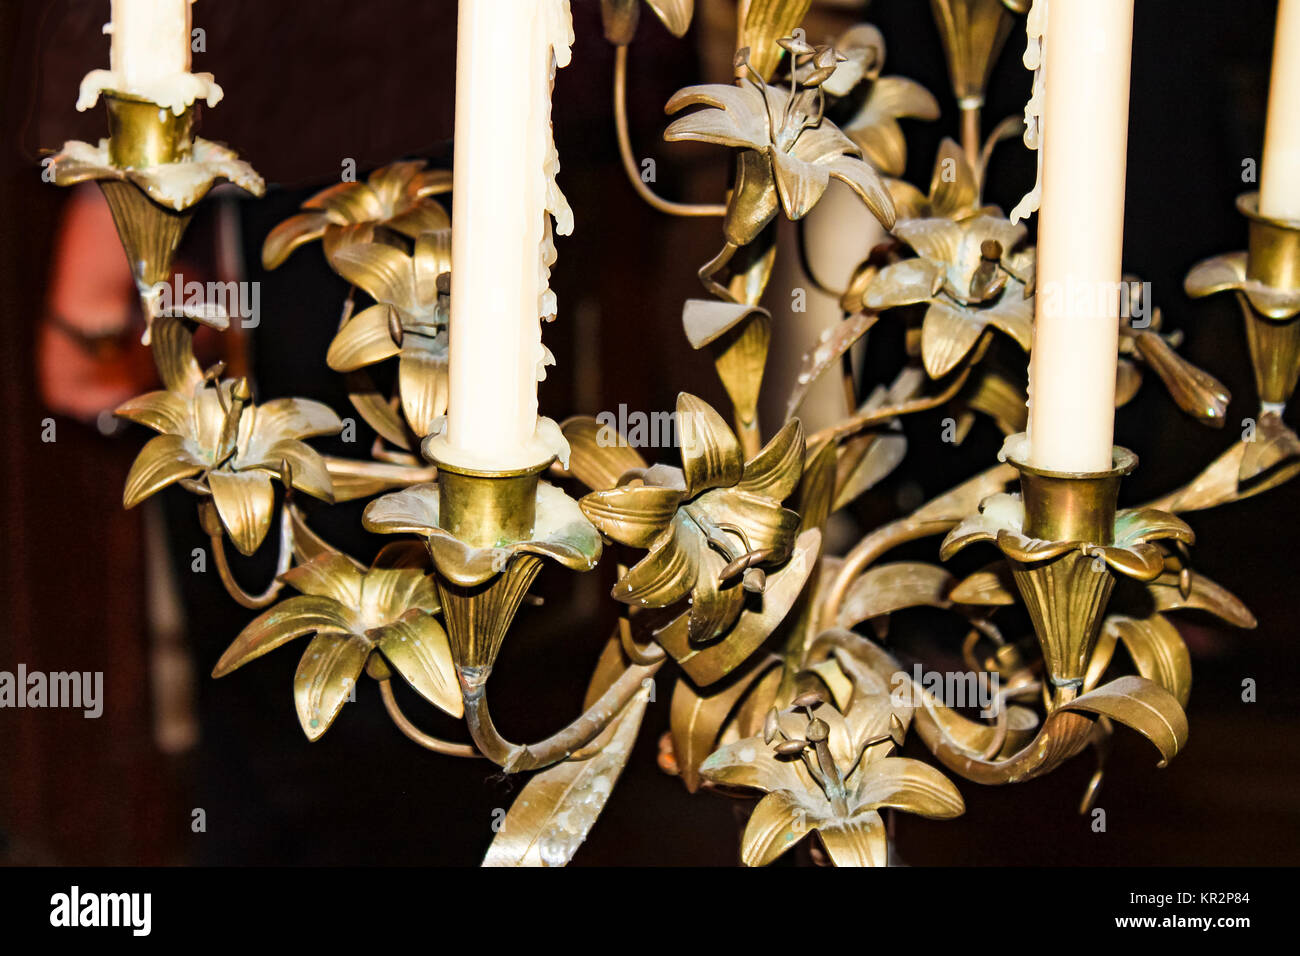 Closeup detail of old bronze chandelier with candles dripping wax Stock Photo